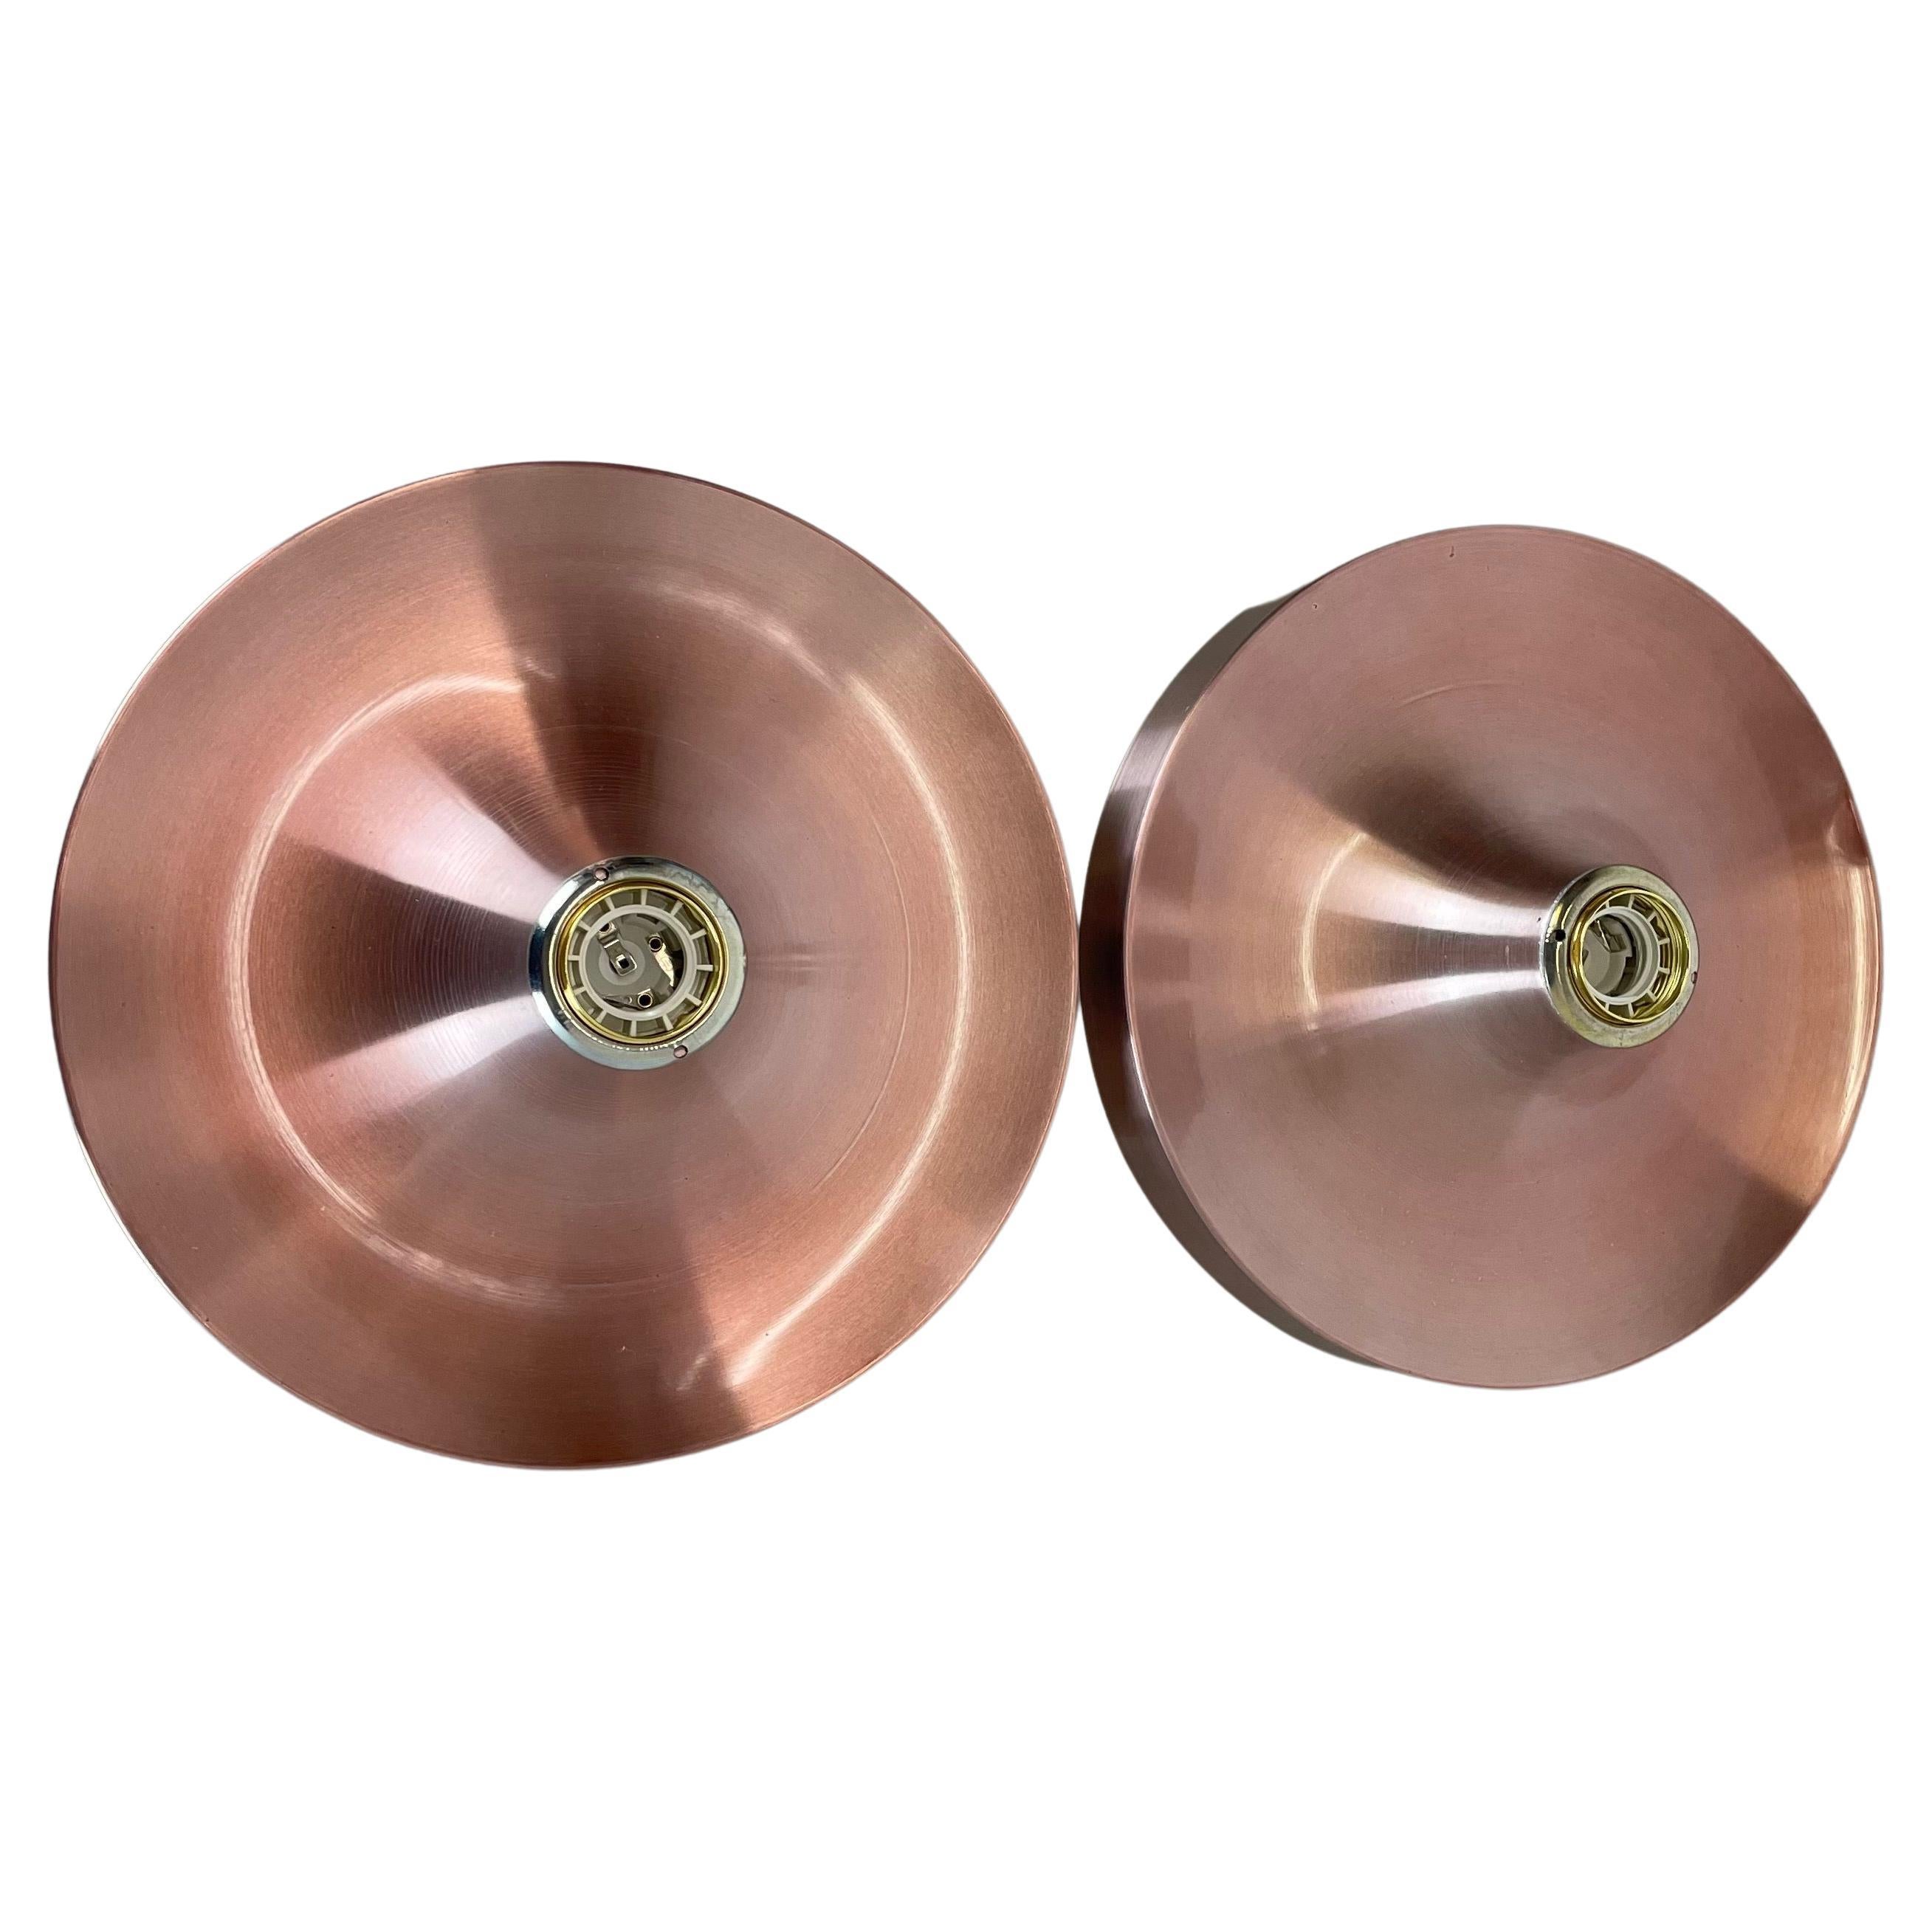 Set of Two Charlotte Perriand Disc Wall Light by Honsel, Germany, 1960s